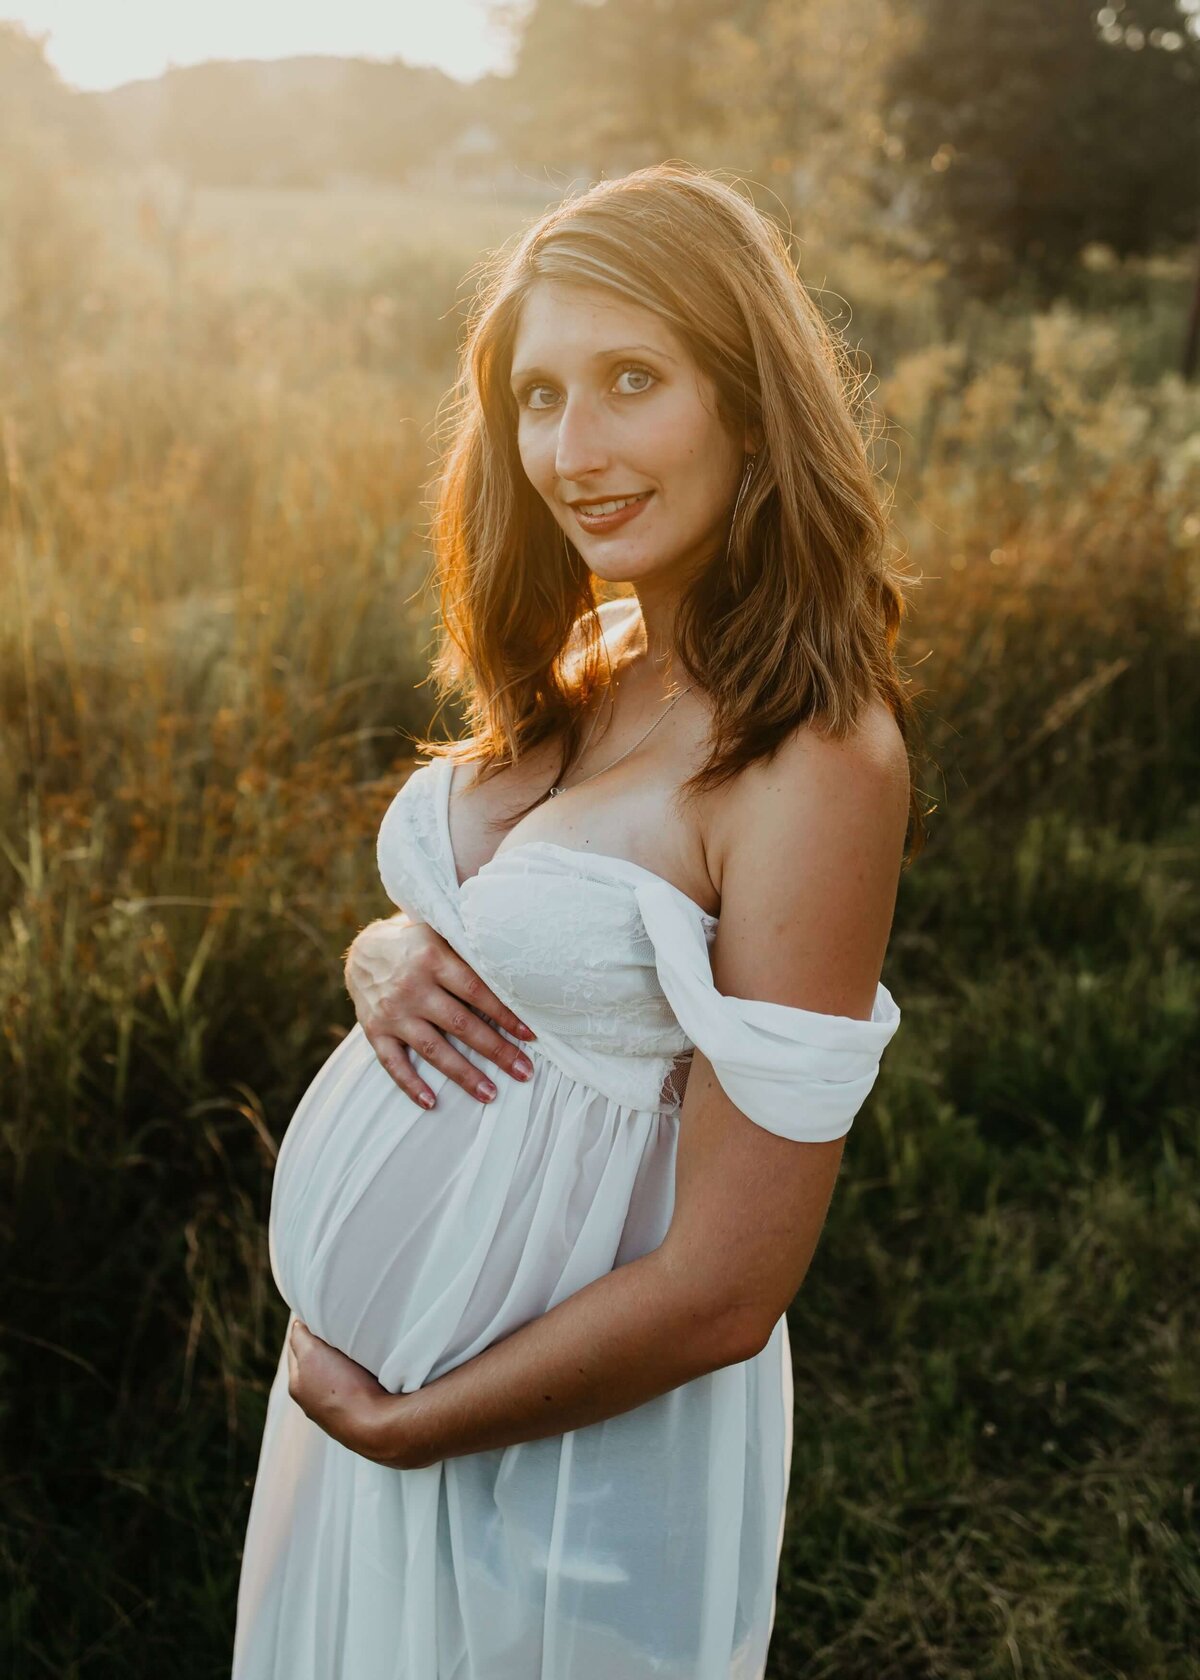 A pregnant woman in a white dress captured by a Pittsburgh maternity photographer standing in a field.